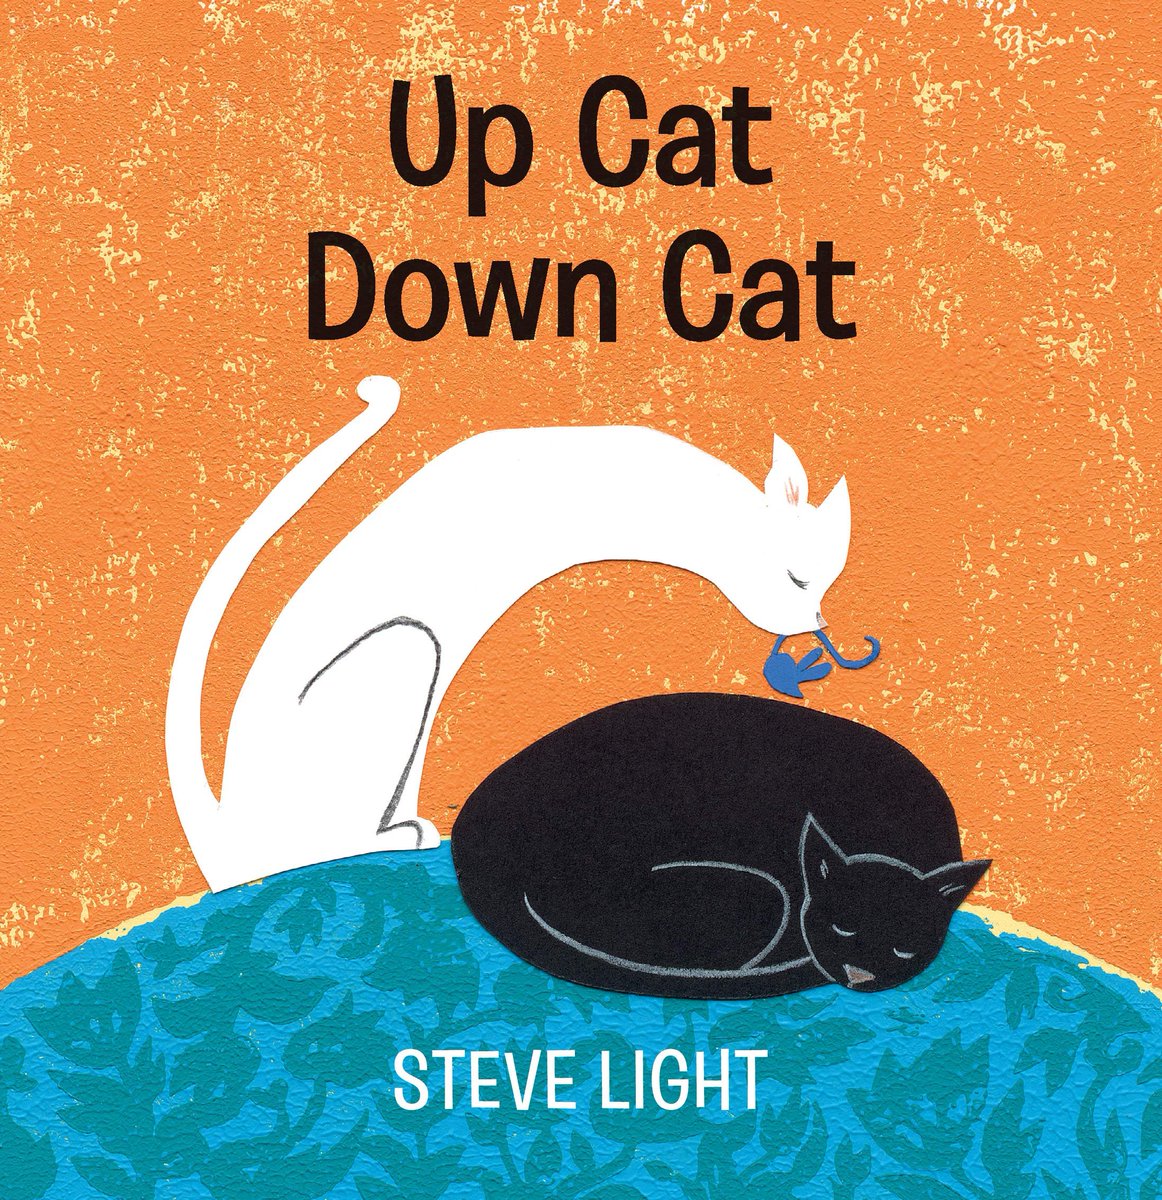 For  #IndieBookstorePreorderWeek, I recommend preordering UP CAT DOWN CAT by  @SteveLight from  @Prairie_Lights/ @PrairieLightsJr in Iowa City, IARelease Date: 5/5/20Publisher:  @Candlewick